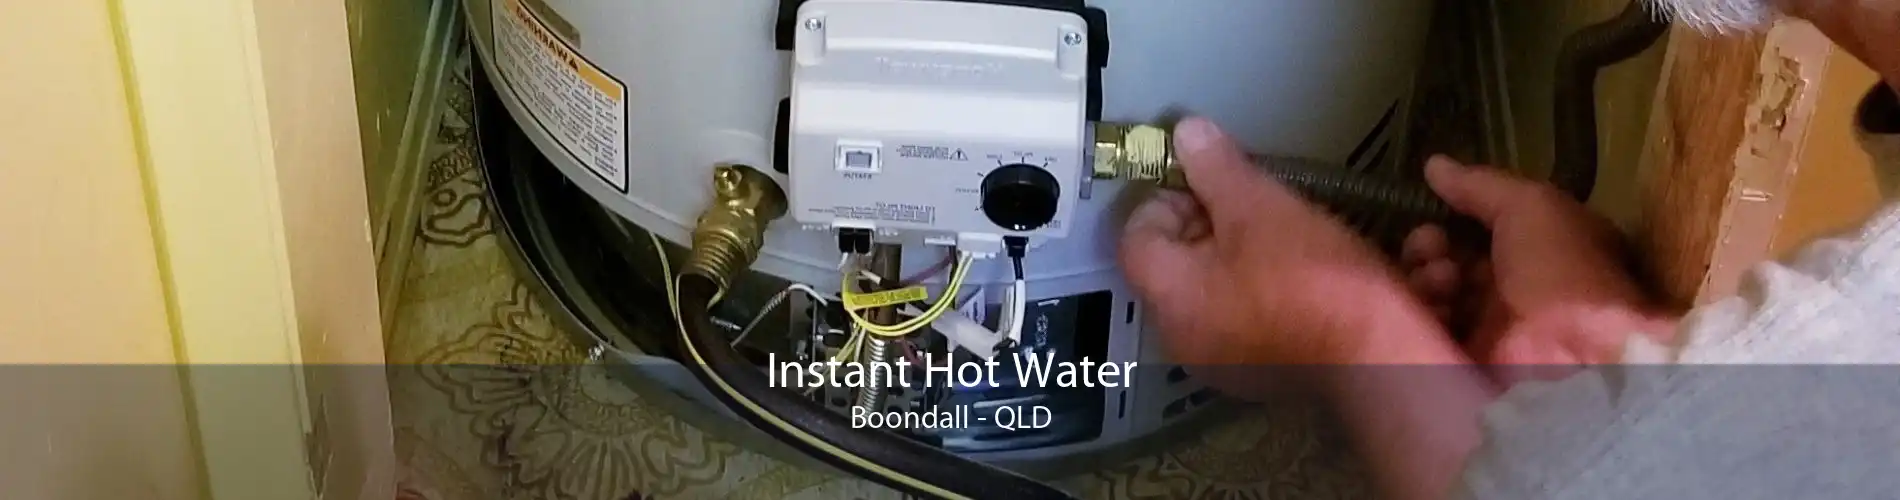 Instant Hot Water Boondall - QLD